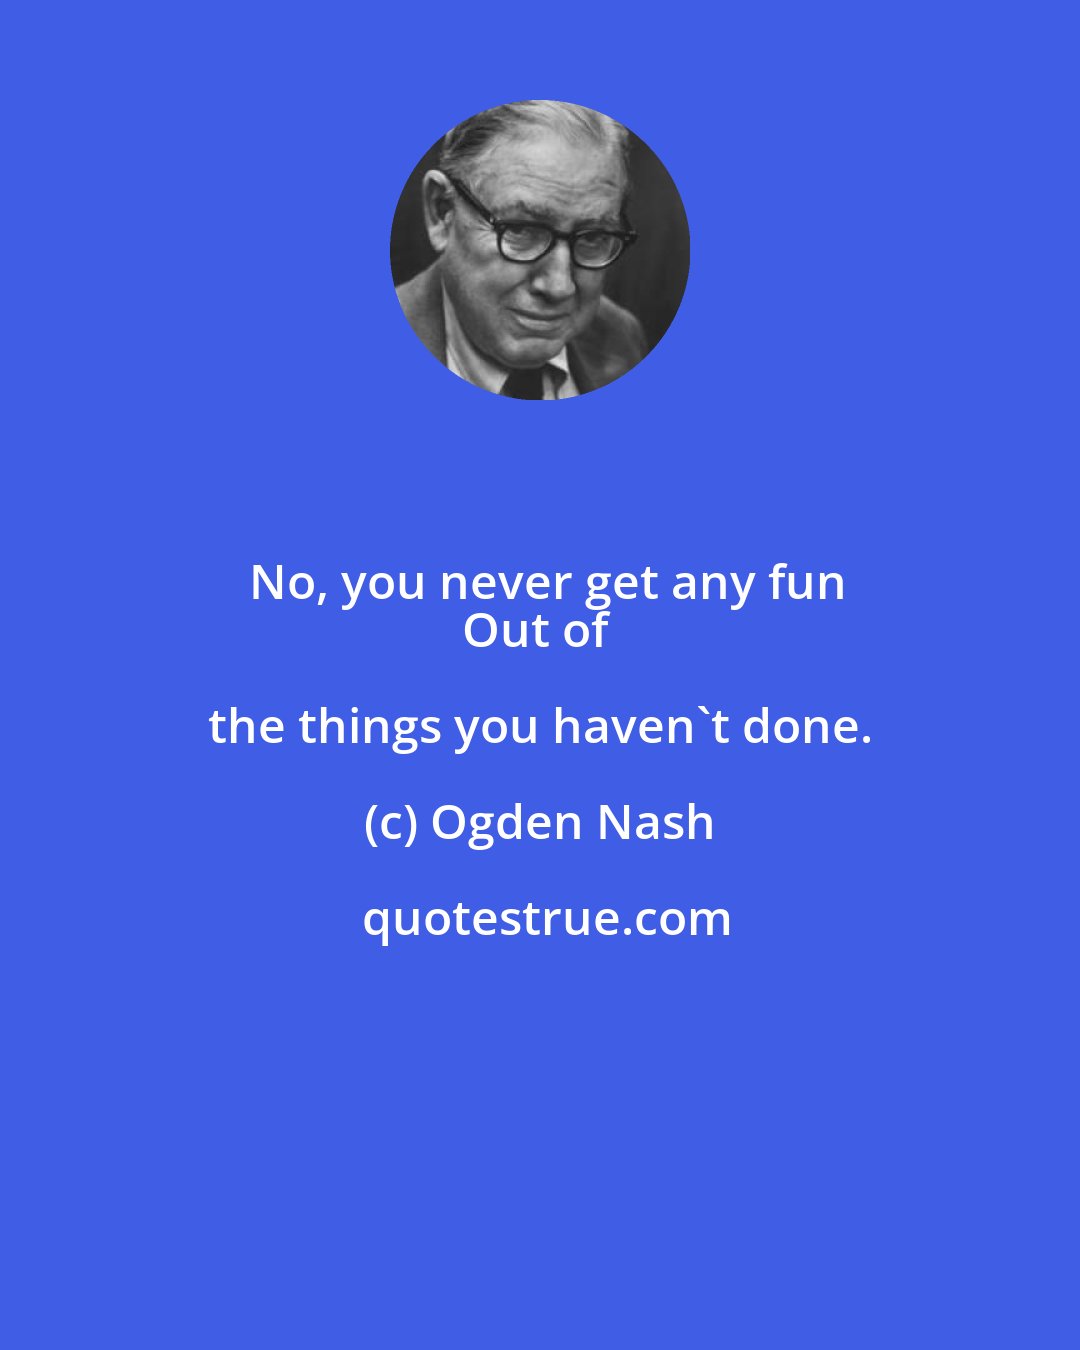 Ogden Nash: No, you never get any fun
Out of the things you haven't done.